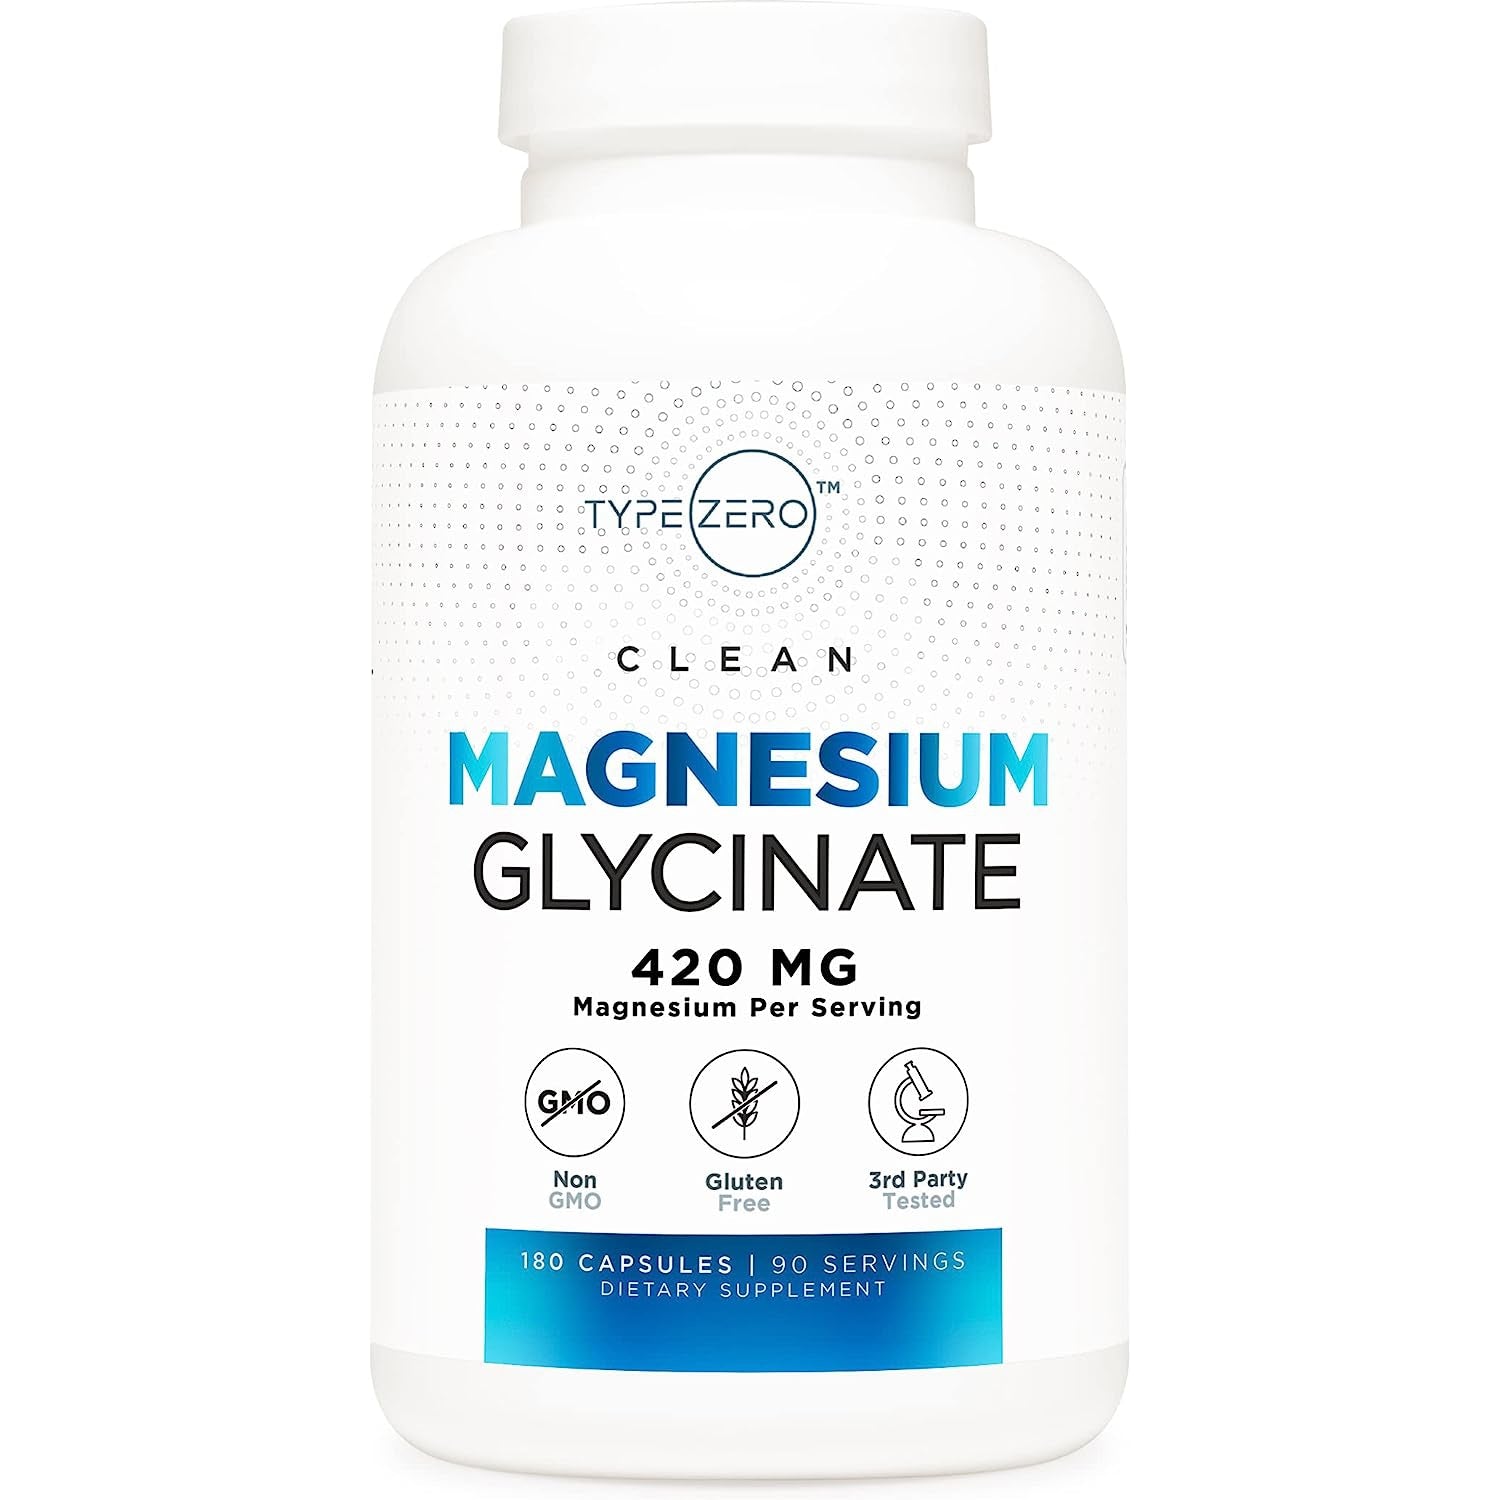 Type Zero Clean Magnesium Glycinate 420mg Pure, Non-GMO, Gluten Free, Natural High Absorbtion 180 Capsules